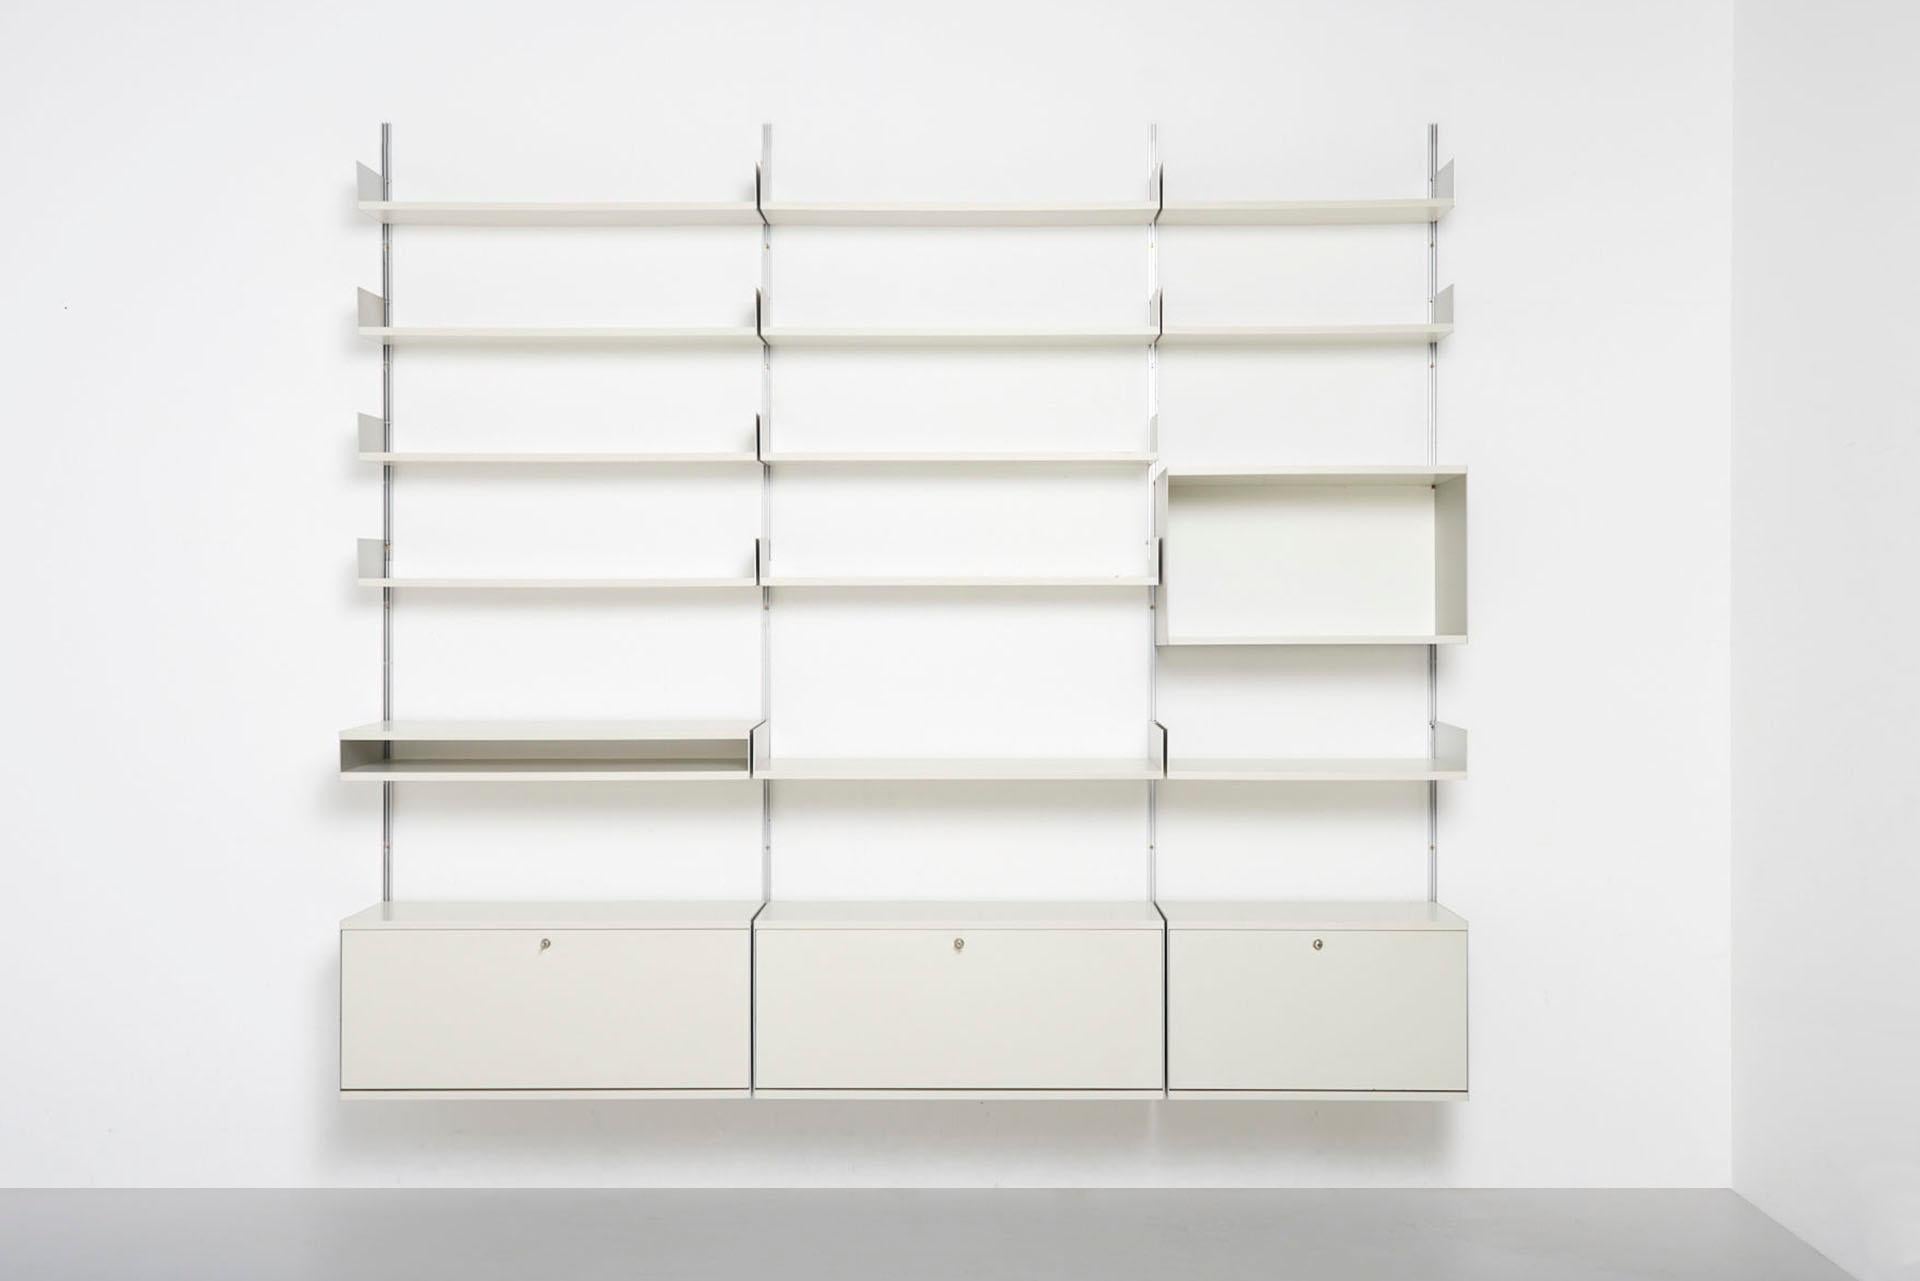 A large wall system made by Vitsoe in Germany. Design by Dieter Rams in 1960. This model 606 shelving system comprises 3 cabinets with lock, an open upper cabinet, 3 deep shelves and 10 standard shelves.